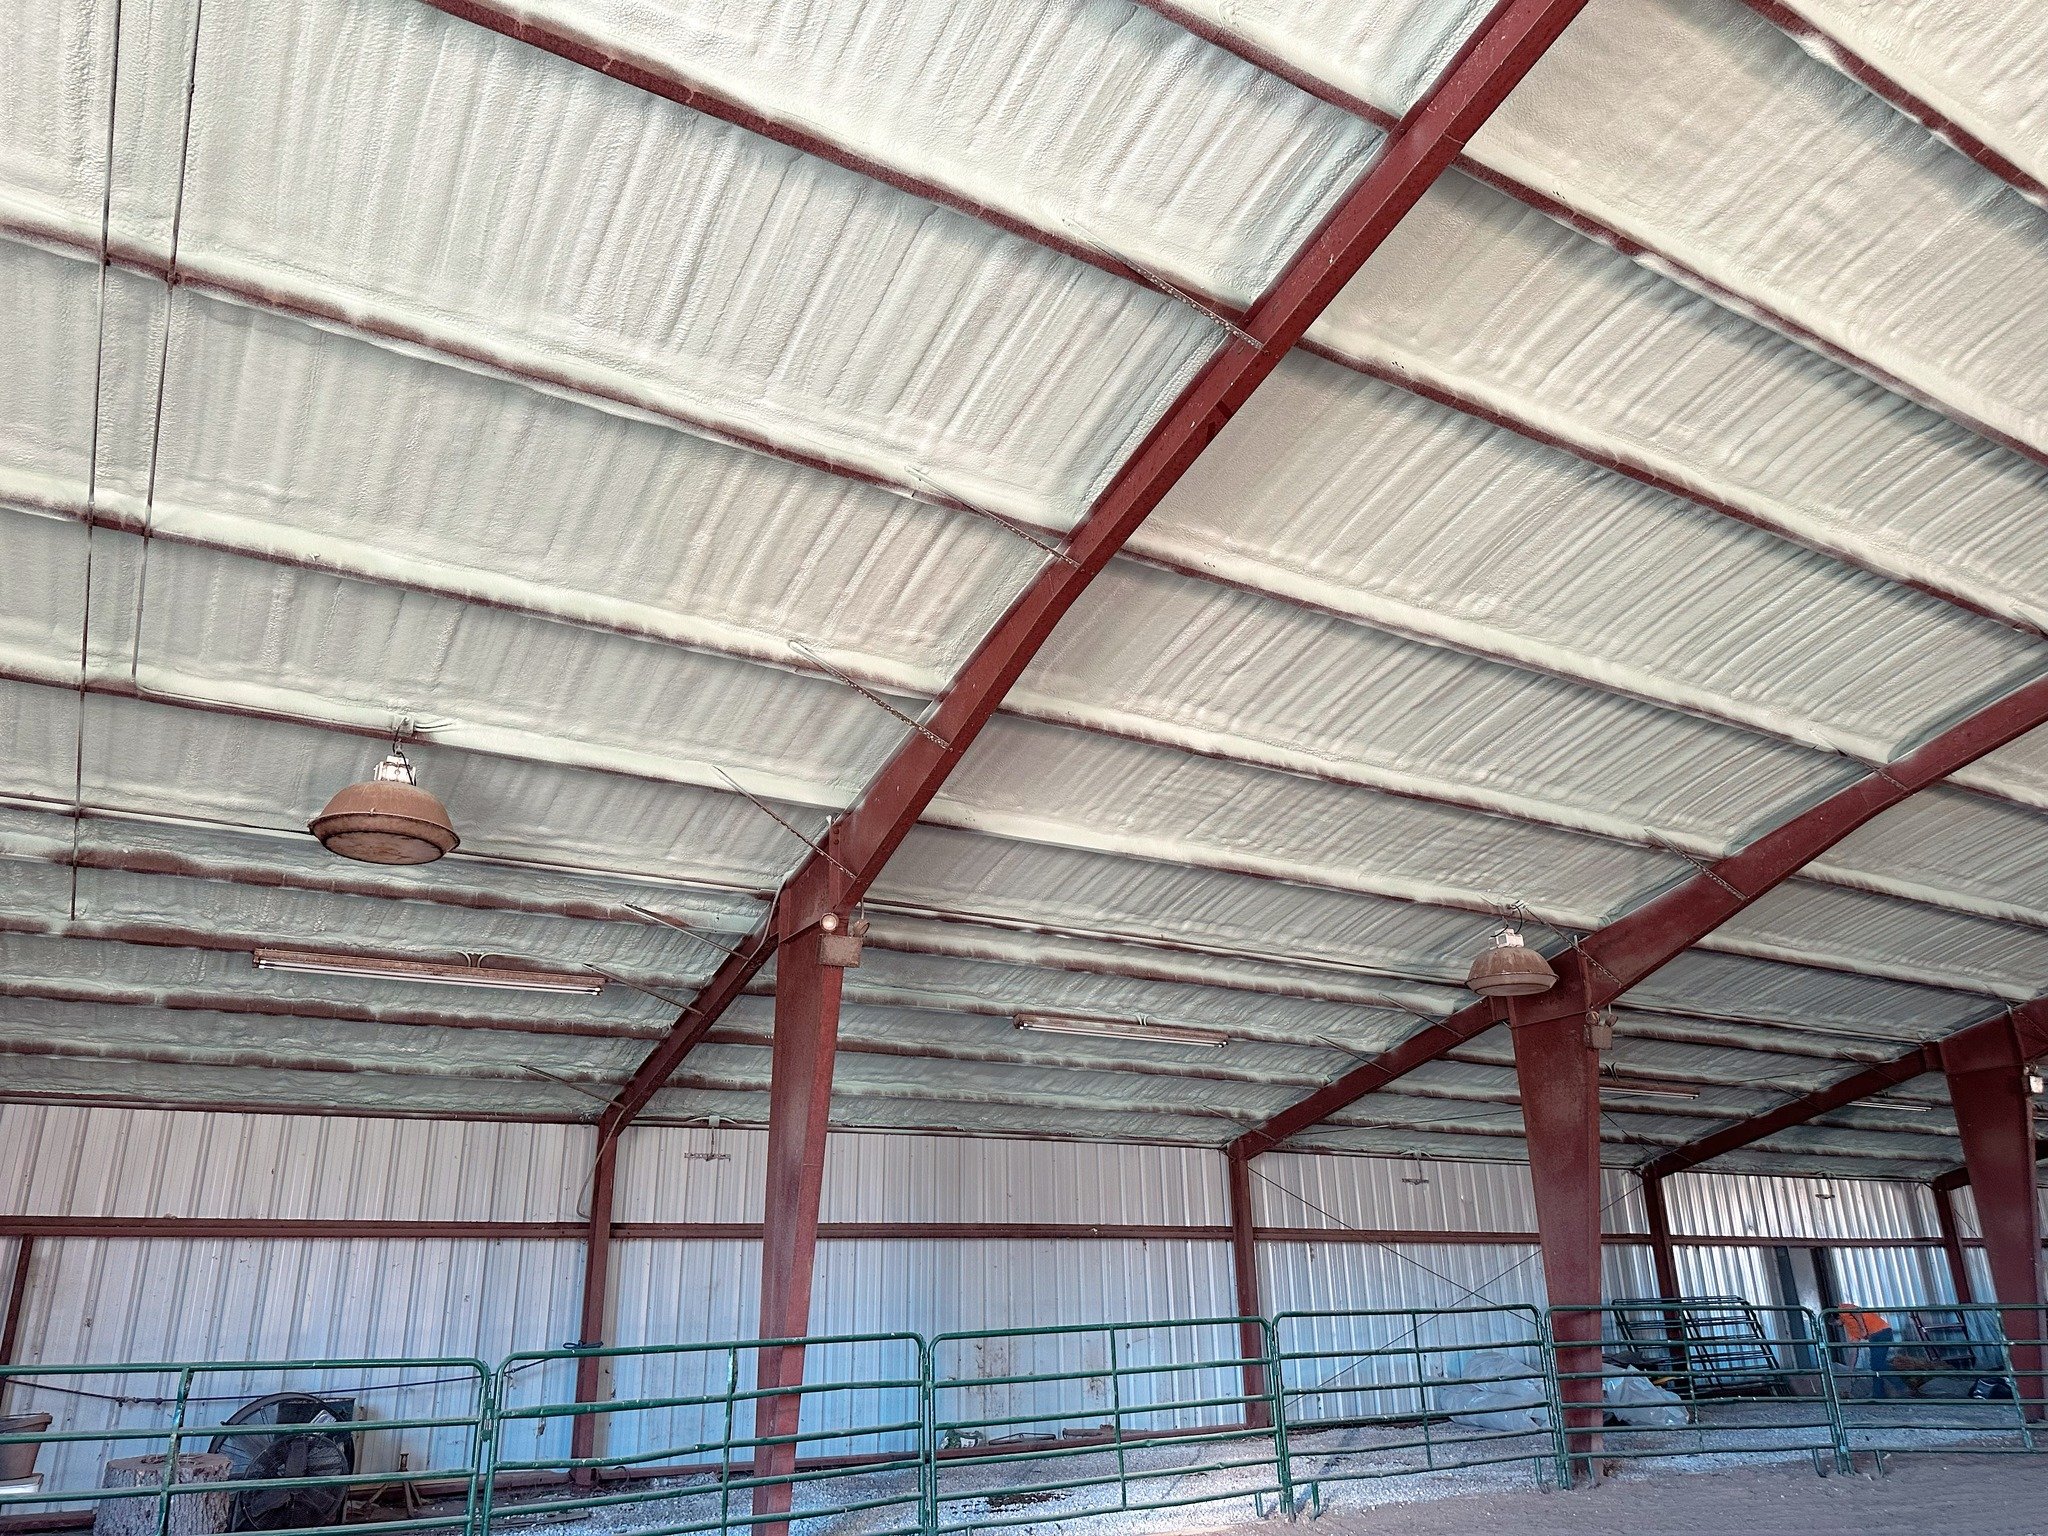 🔍 Discover the Power of Spray Foam Insulation! 🔍
-
Closed cell spray foam insulation offers superior insulation and moisture resistance, perfect for metal buildings and pole barns! 
-
Want to learn more? Visit our website: www.ballardsinsulation.co